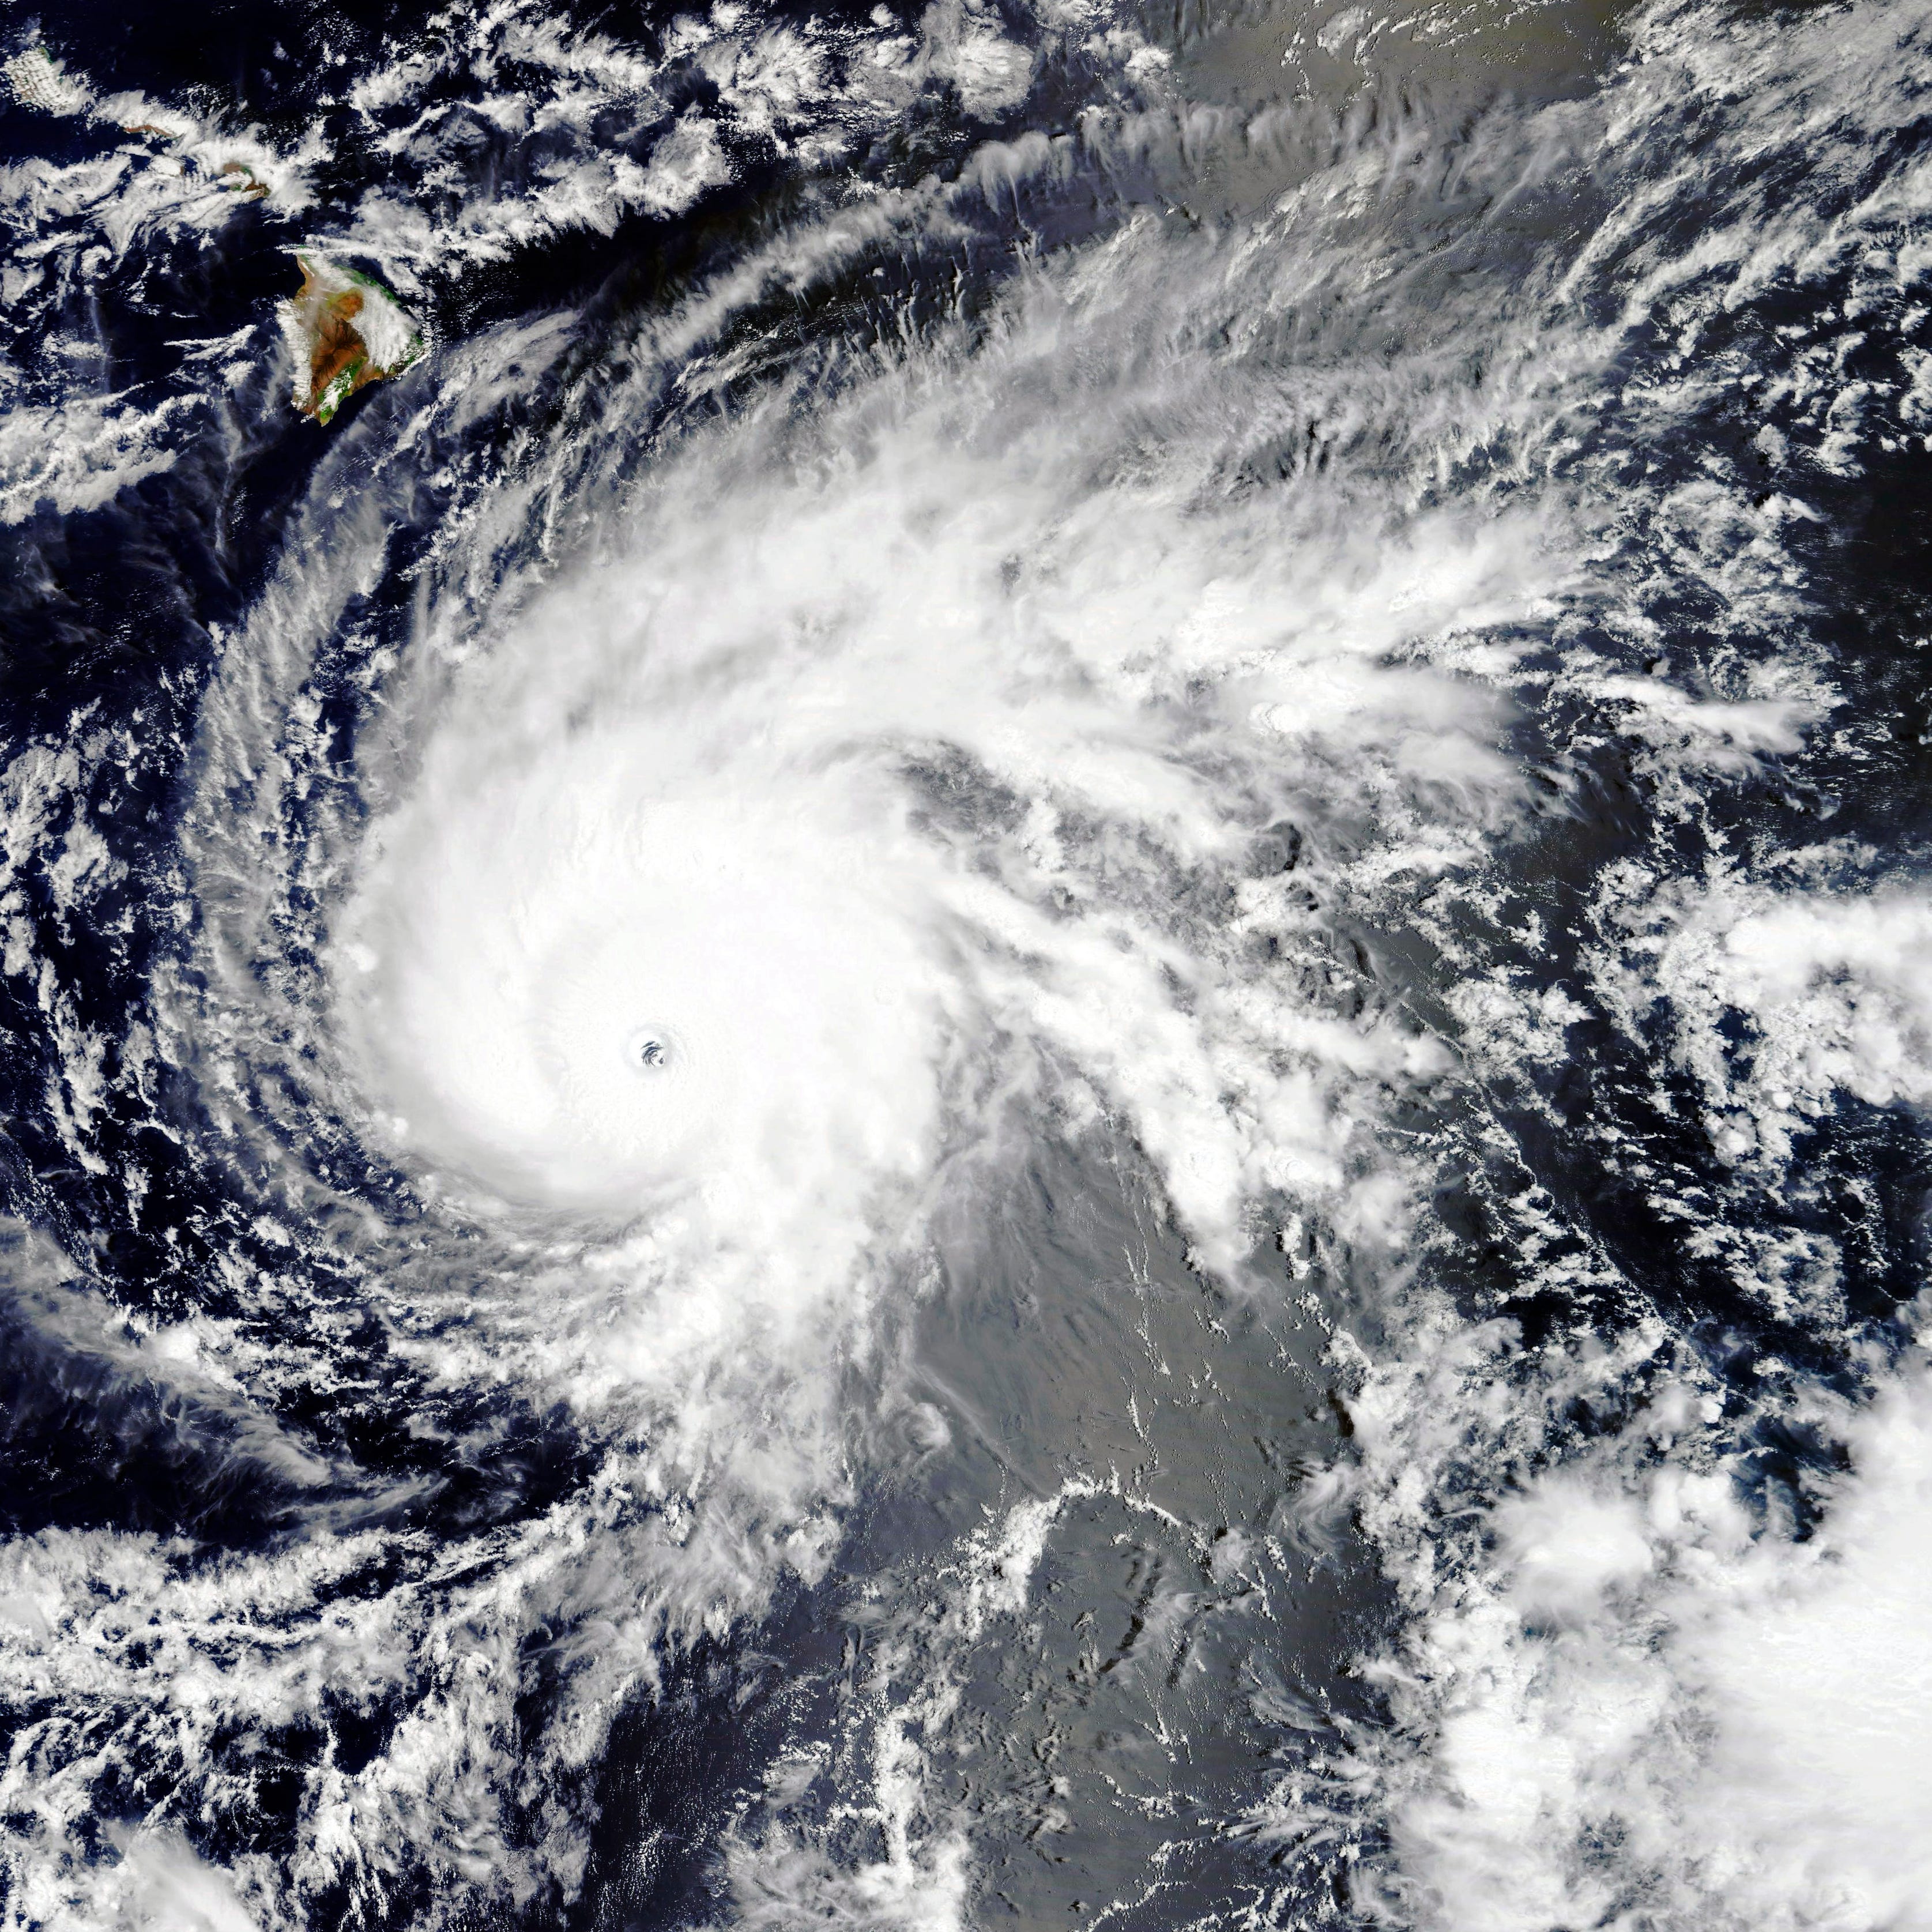 This NASA satellite image, released on Tuesday, shows Hurricane Lane near the Big Island of Hawaii (upper left).